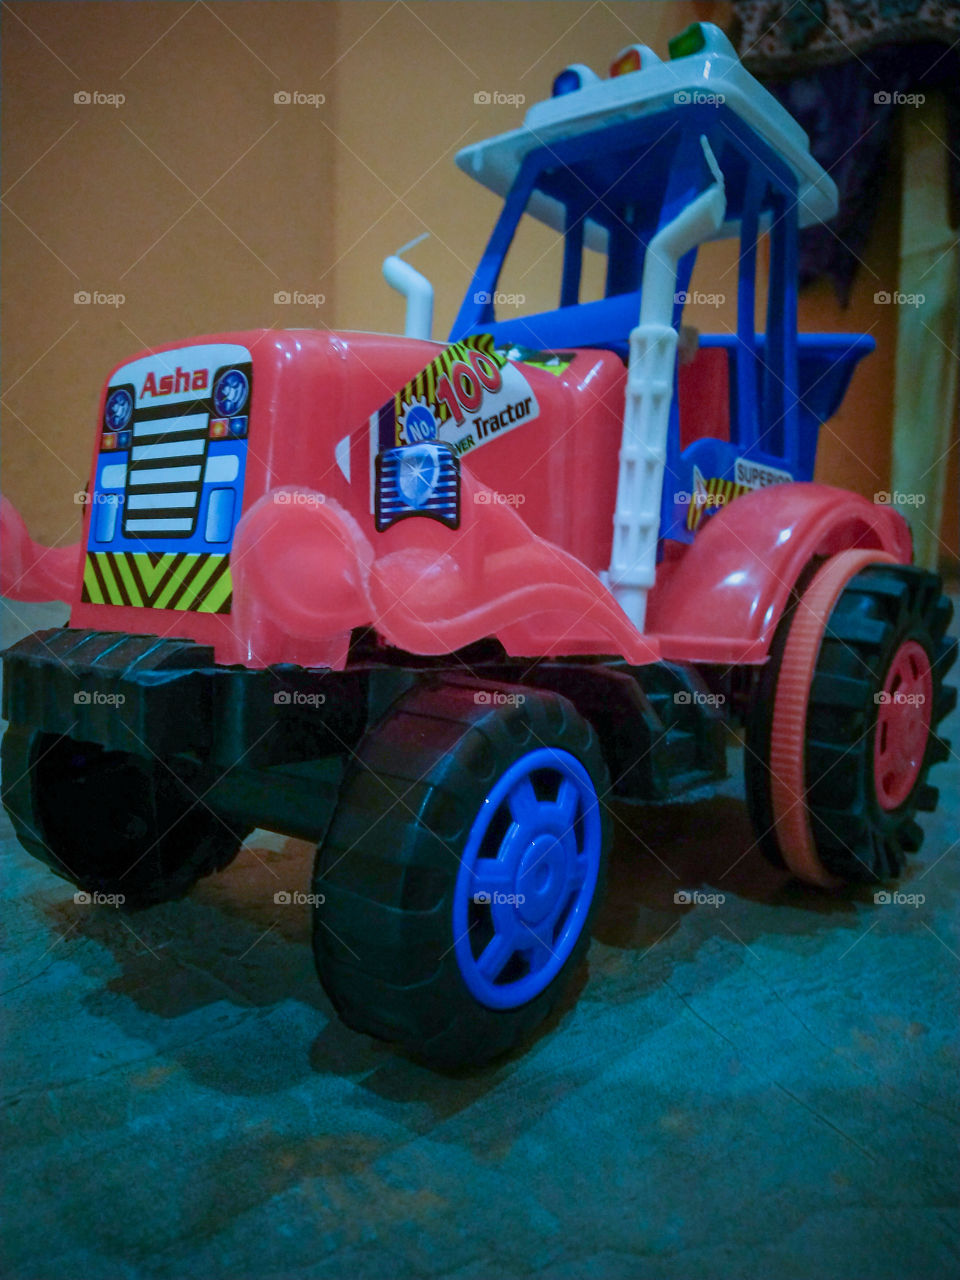 An Indian child favorite toy tractor